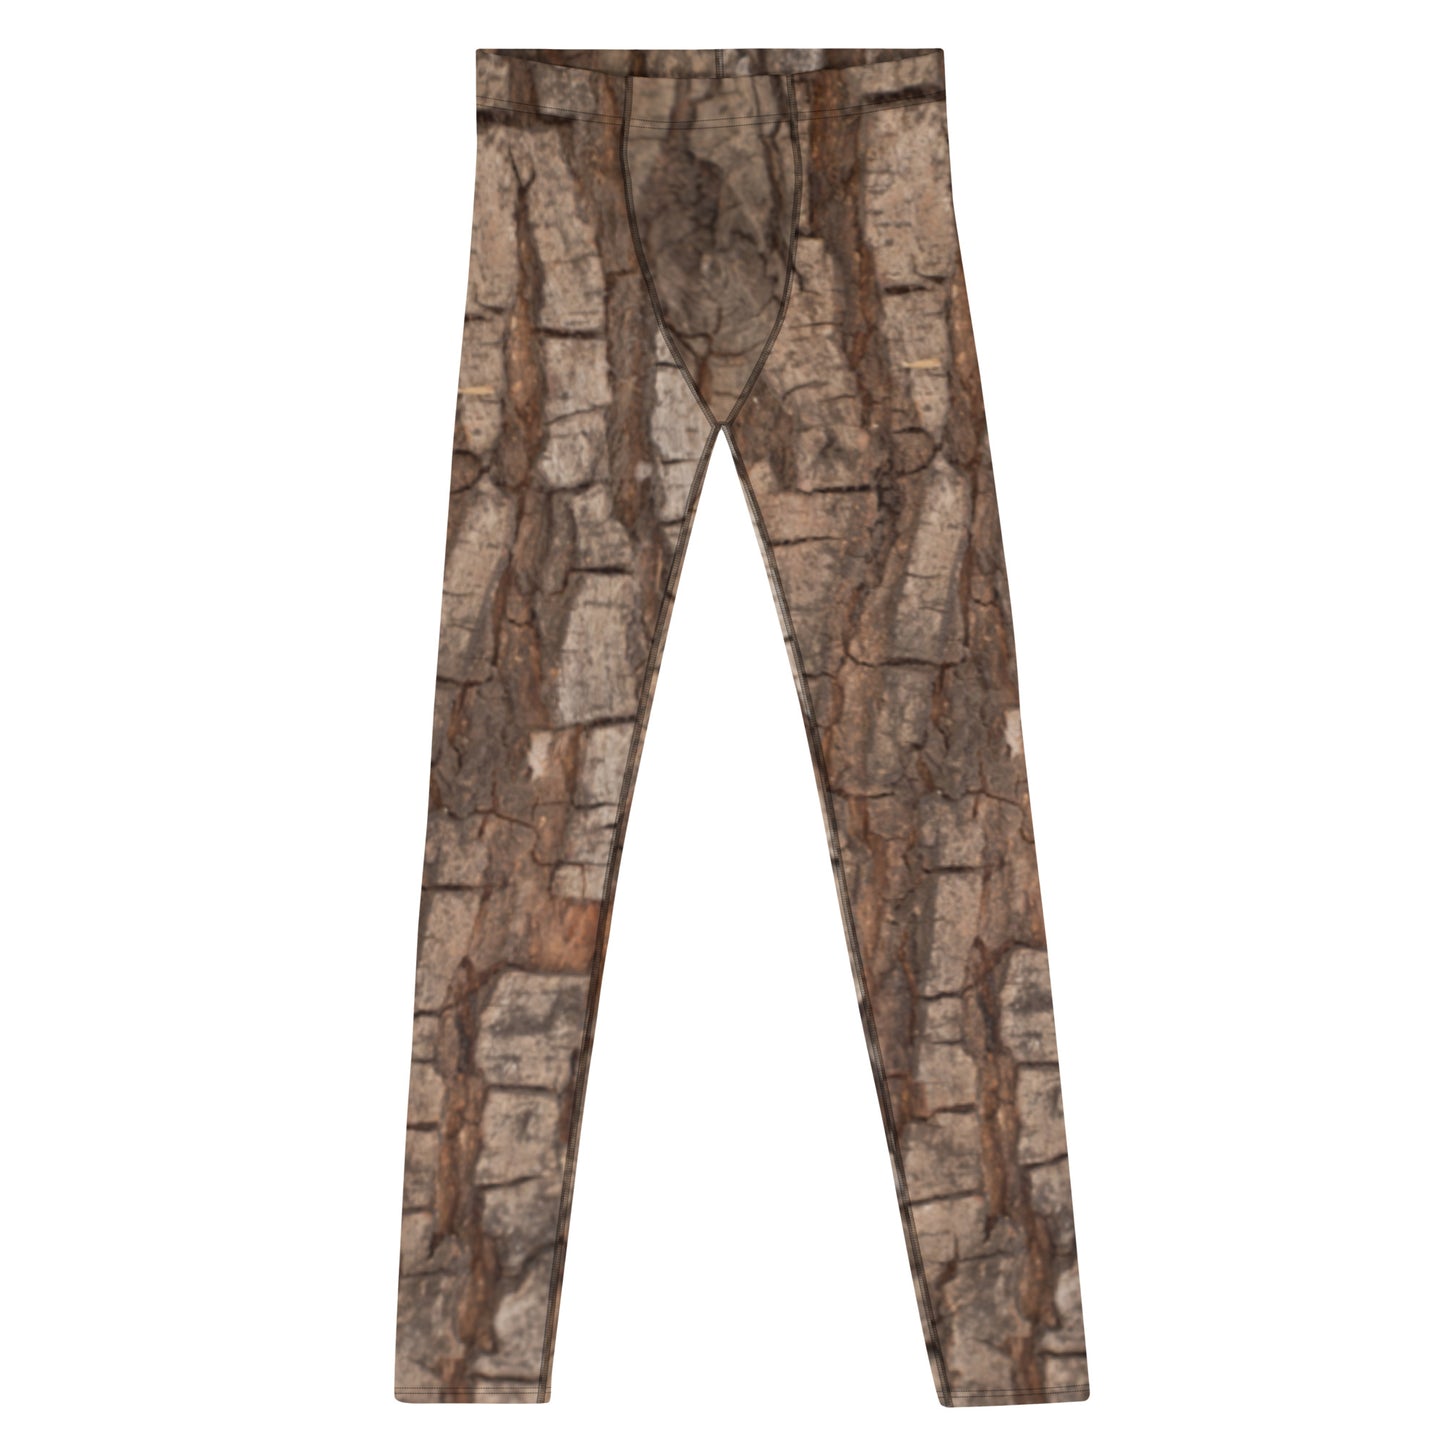 Tree Bark Camo Men Leggings, Real Wood Costume Forest Trunk Brown Halloween Cosplay Hunting Nature Printed Adult Pants Tights Starcove Fashion